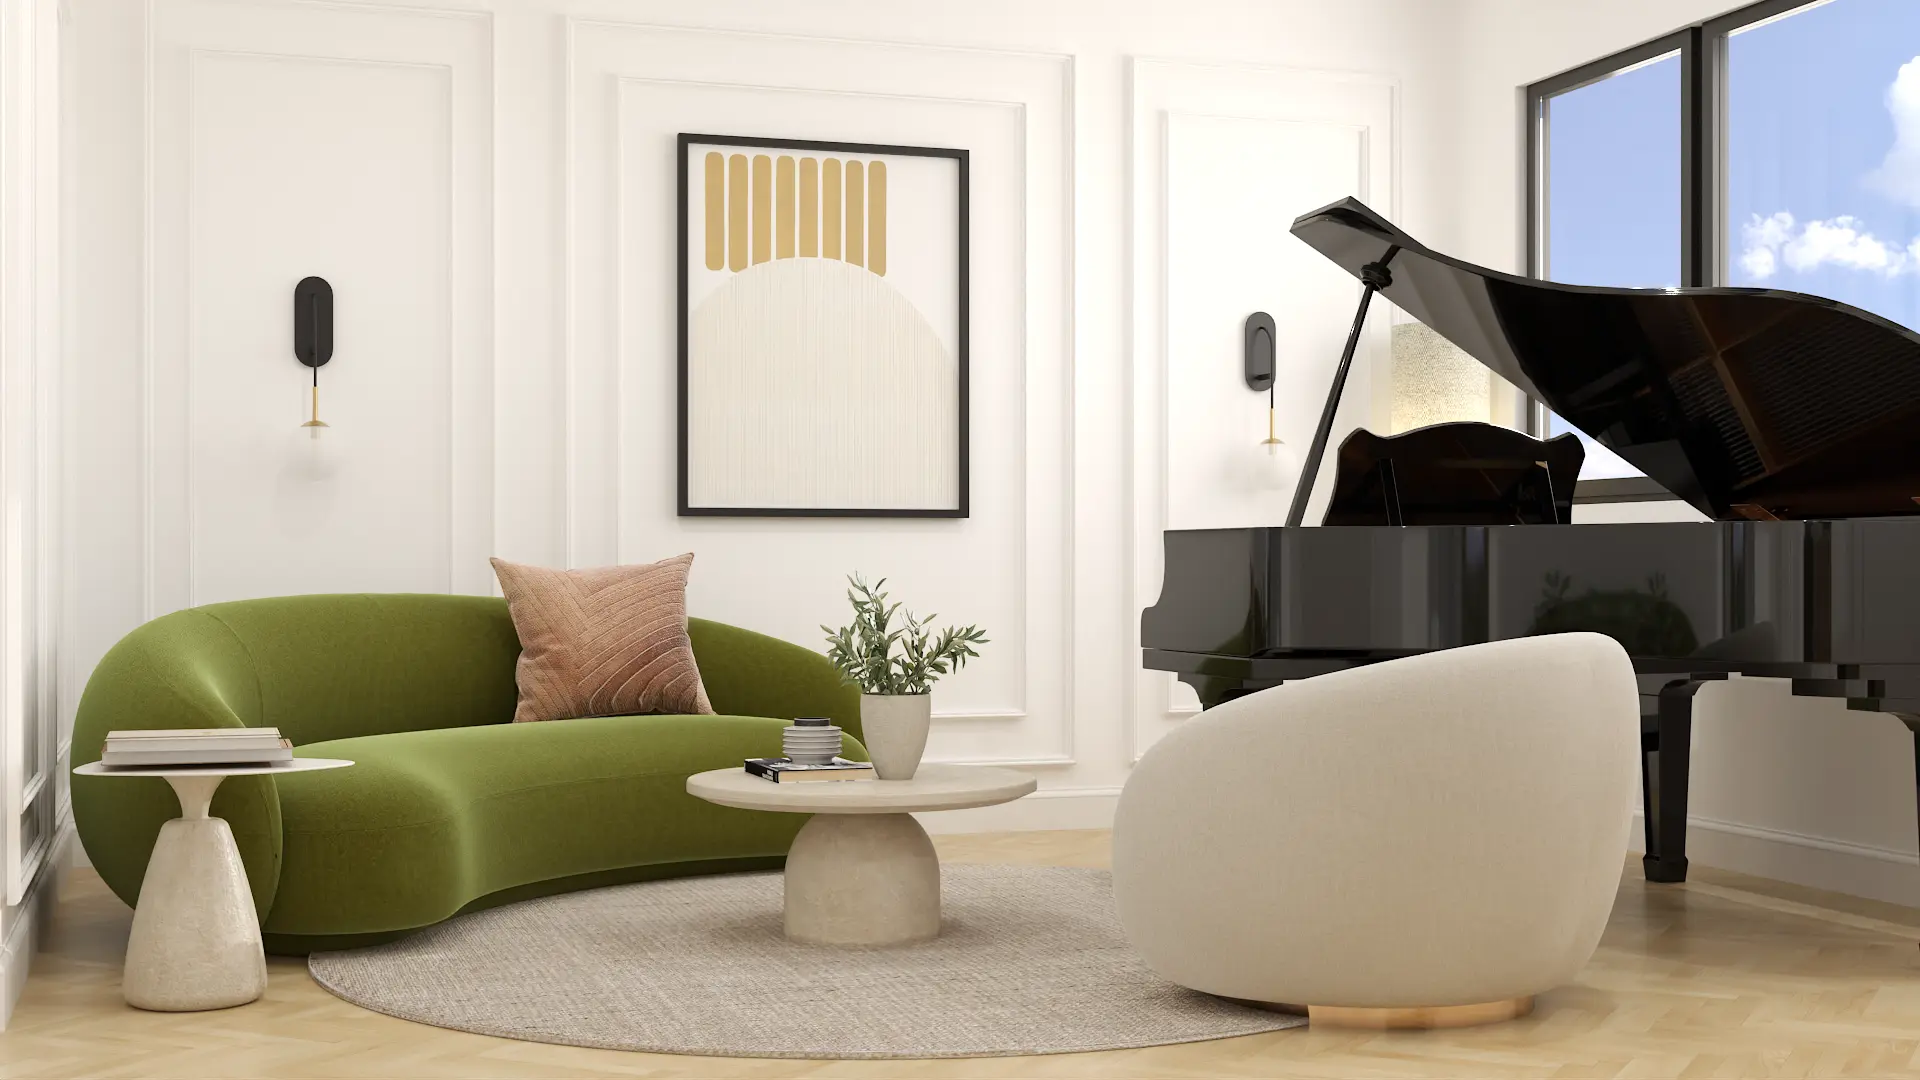 A stylish recreational room with a grand piano, a green sofa, a modern white armchair, and a minimalist coffee table. Wall art and sconces add to the sophisticated ambiance. Design by Debora, an online interior design service.